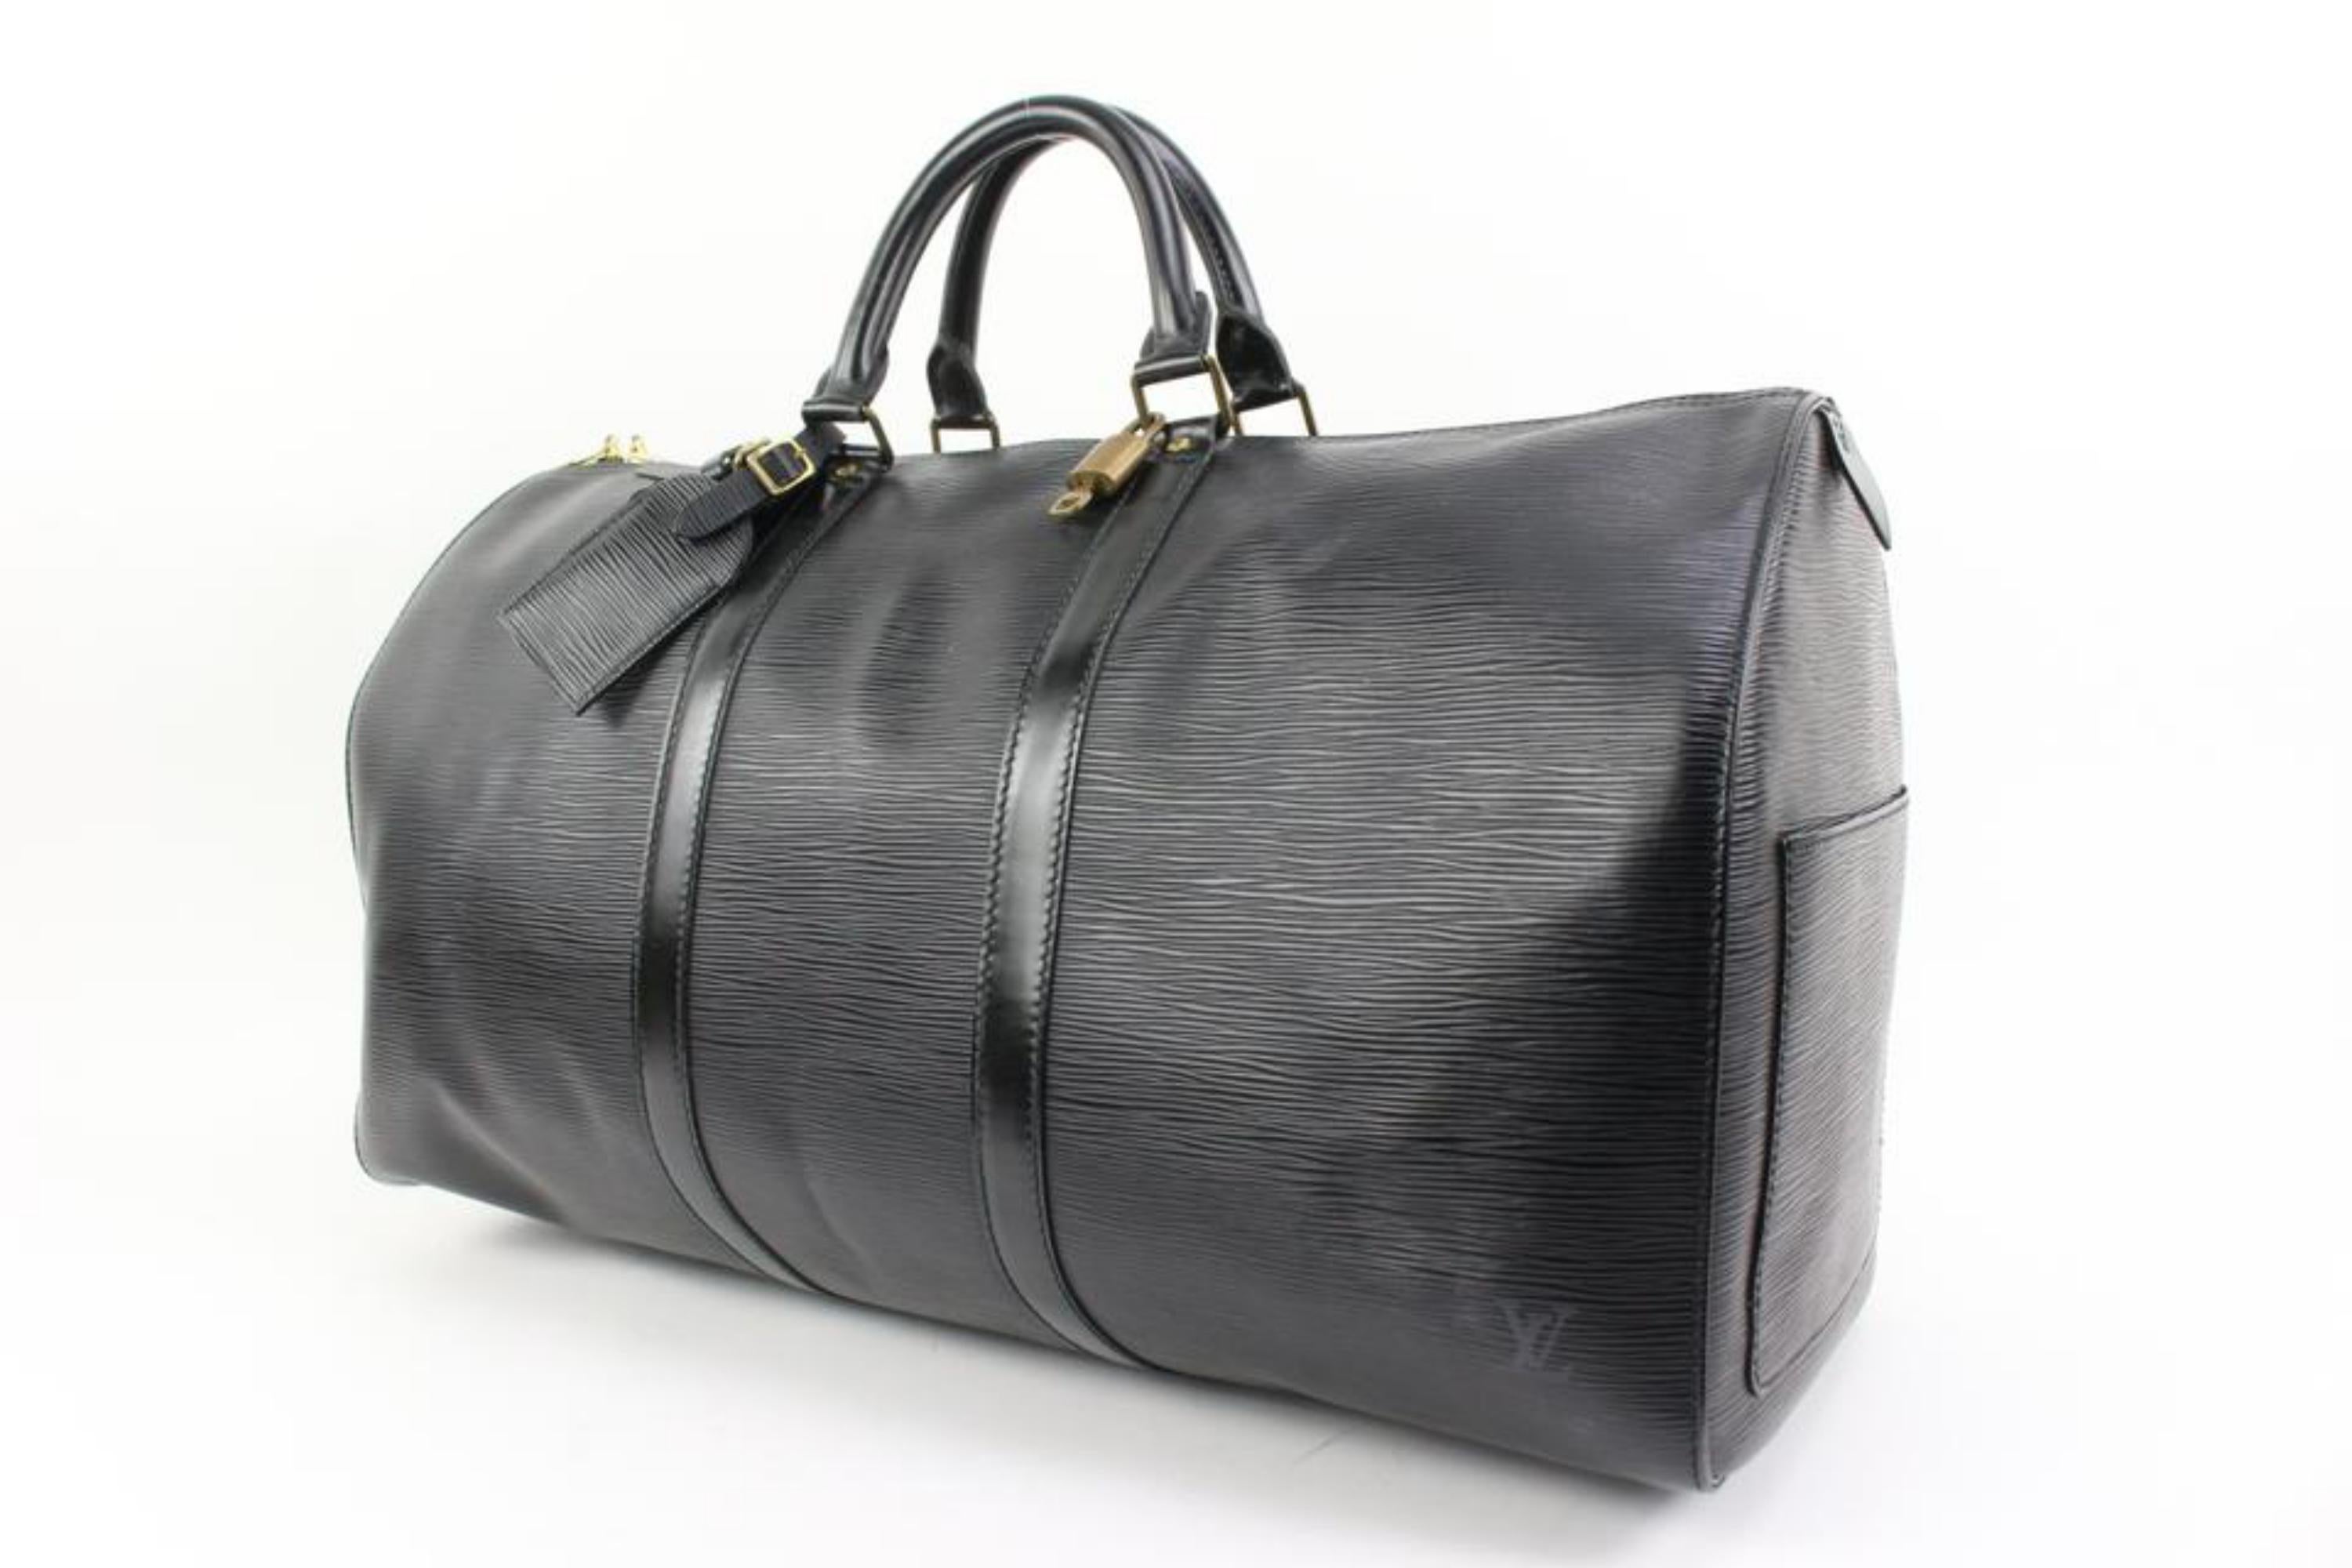 Louis Vuitton Black Epi Leather Noir Keepall 50 Duffle Bag 66lv315s
Date Code/Serial Number: VI0931
Made In: France
Measurements: Length:  20.5